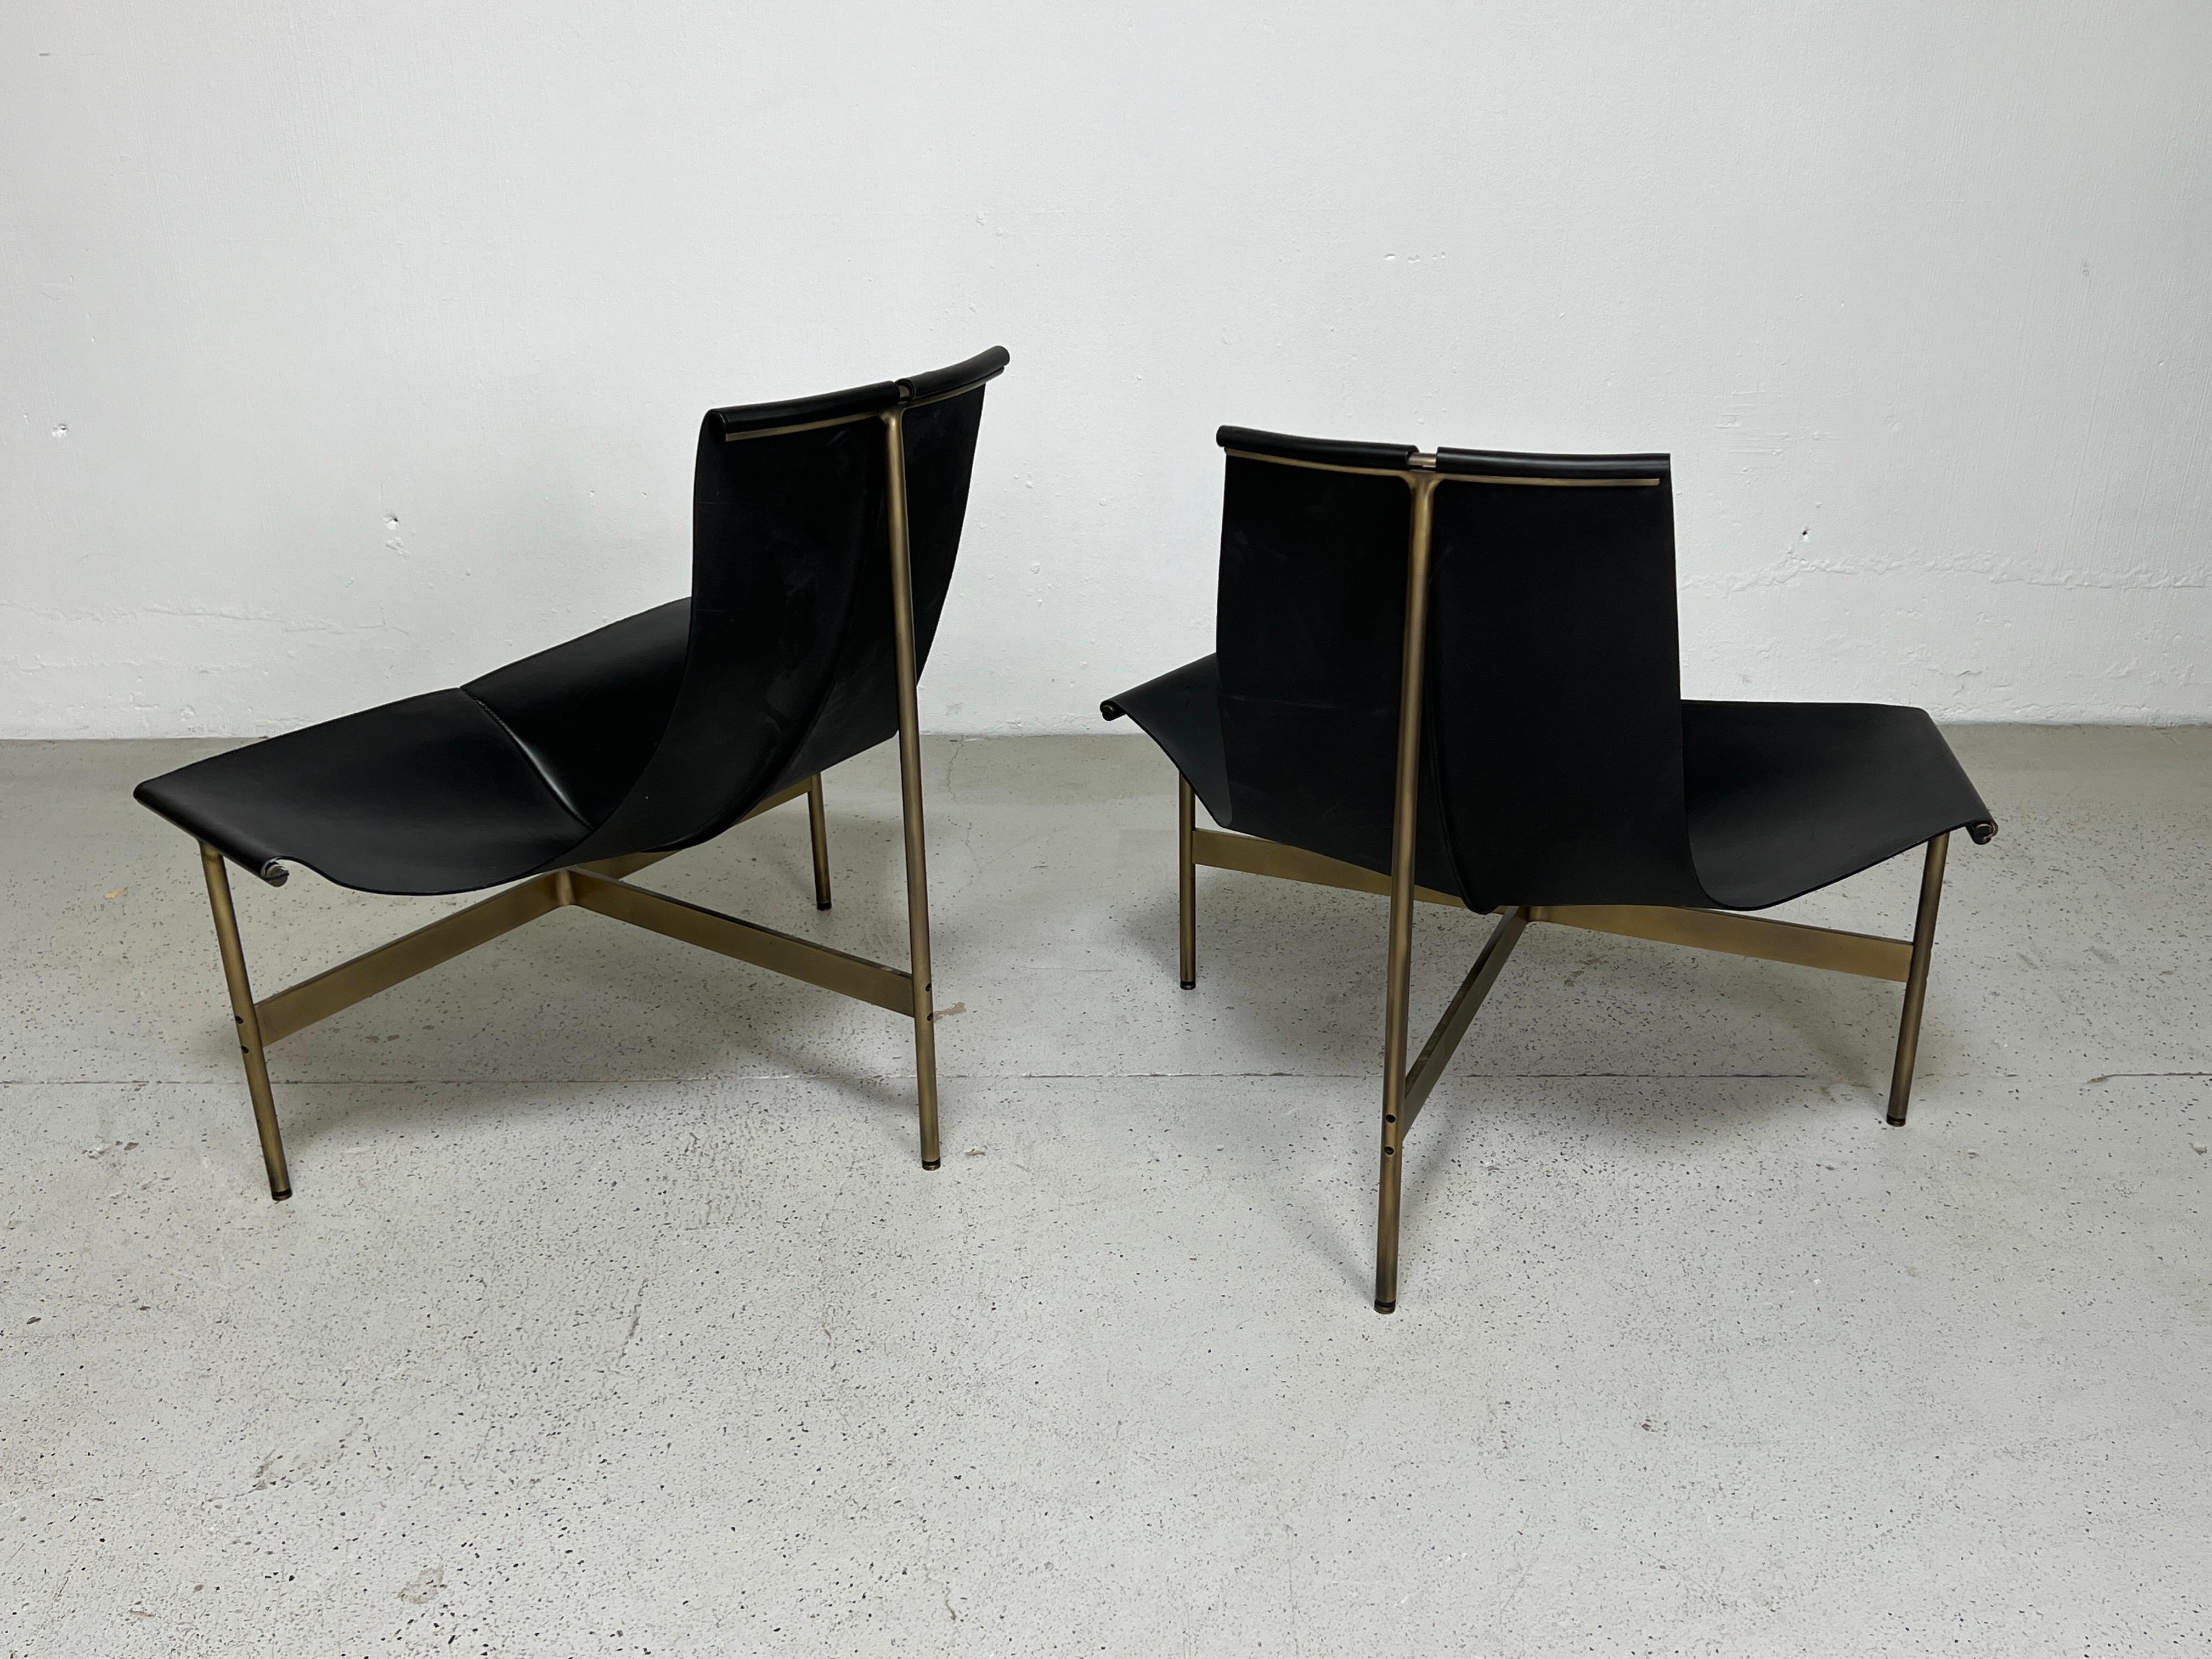 Pair of Bronze TG-15 Lounge Chair by Katavolos, Littell, & Kelley For Sale 3